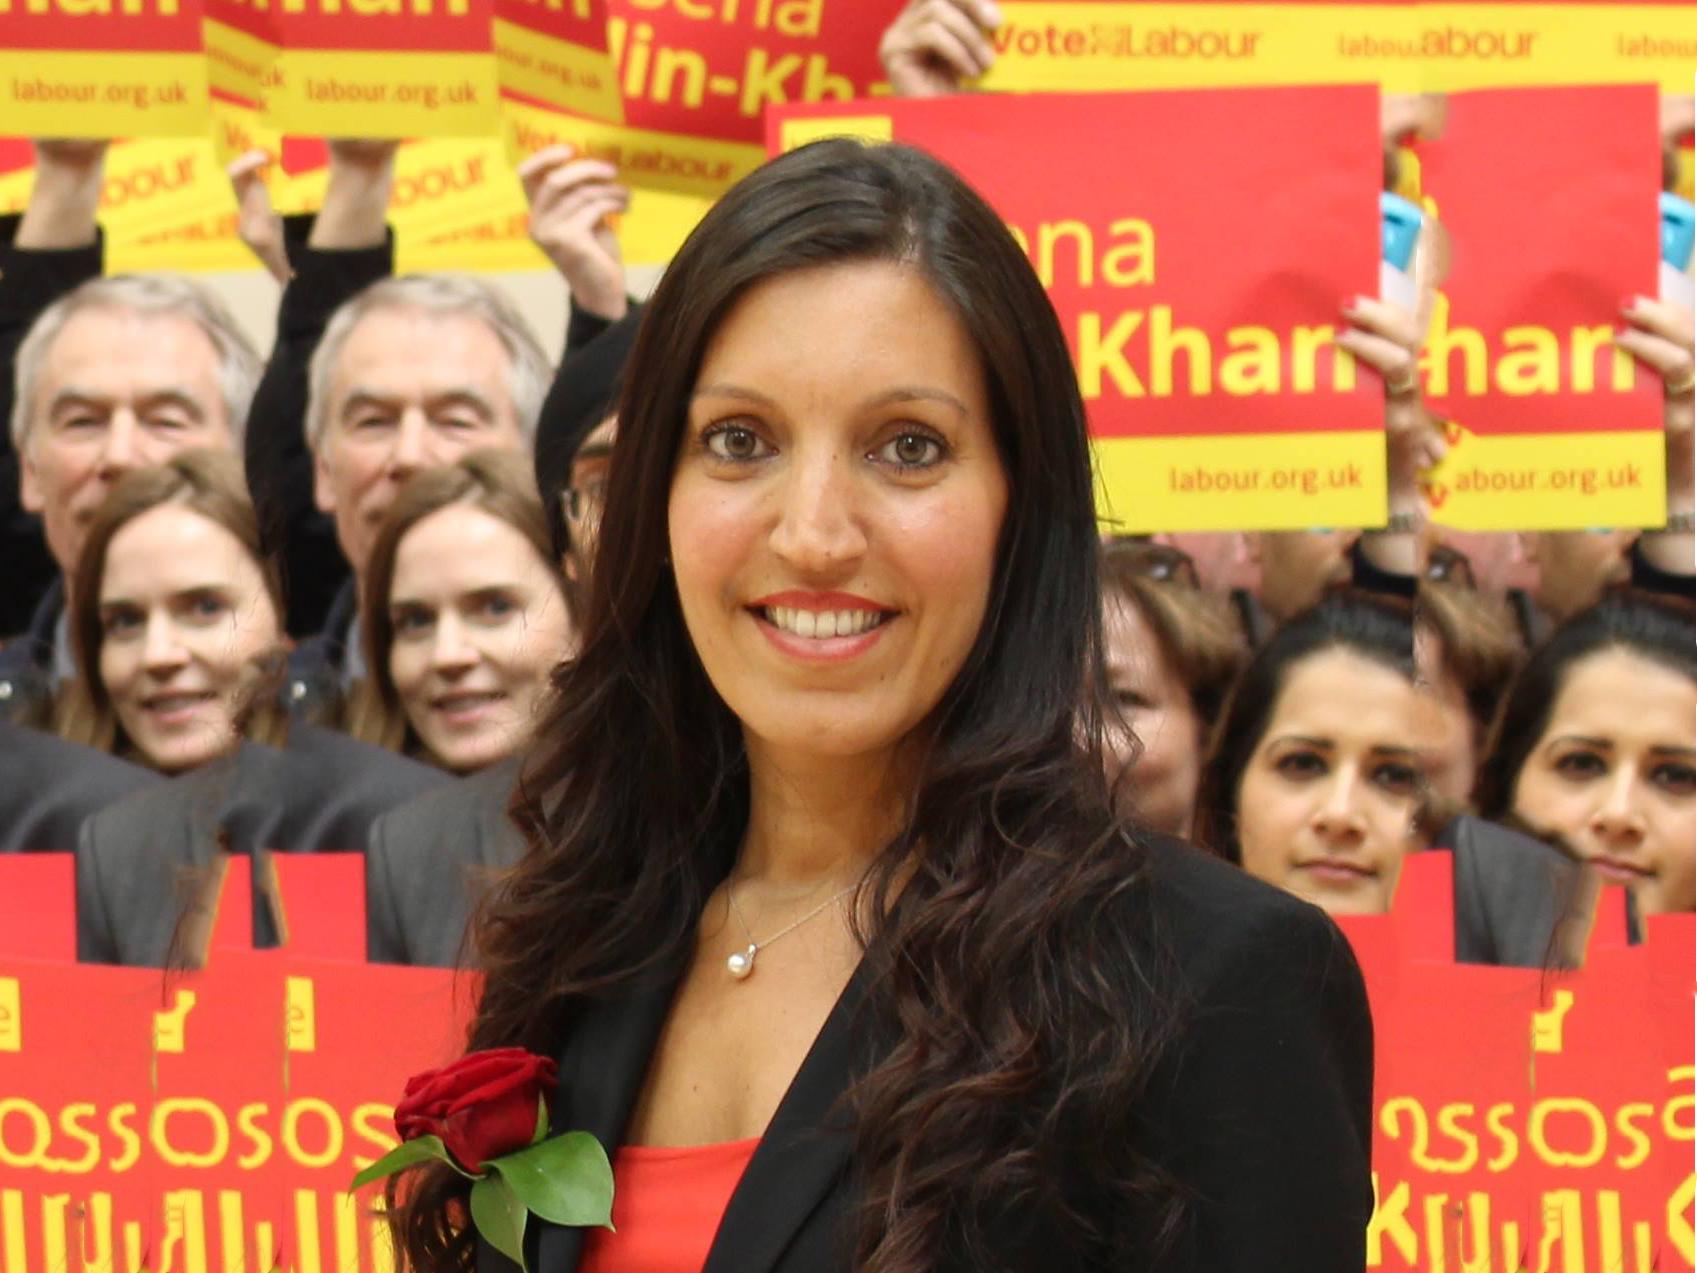 Dr Rosena Allin-Khan @DrRosena Labour MP for #Tooting Shadow Minister for Mental Health in @UKLabour Shadow Cabinet A&E Doctor Born & raised in Tooting rosena@drrosena.co.uk